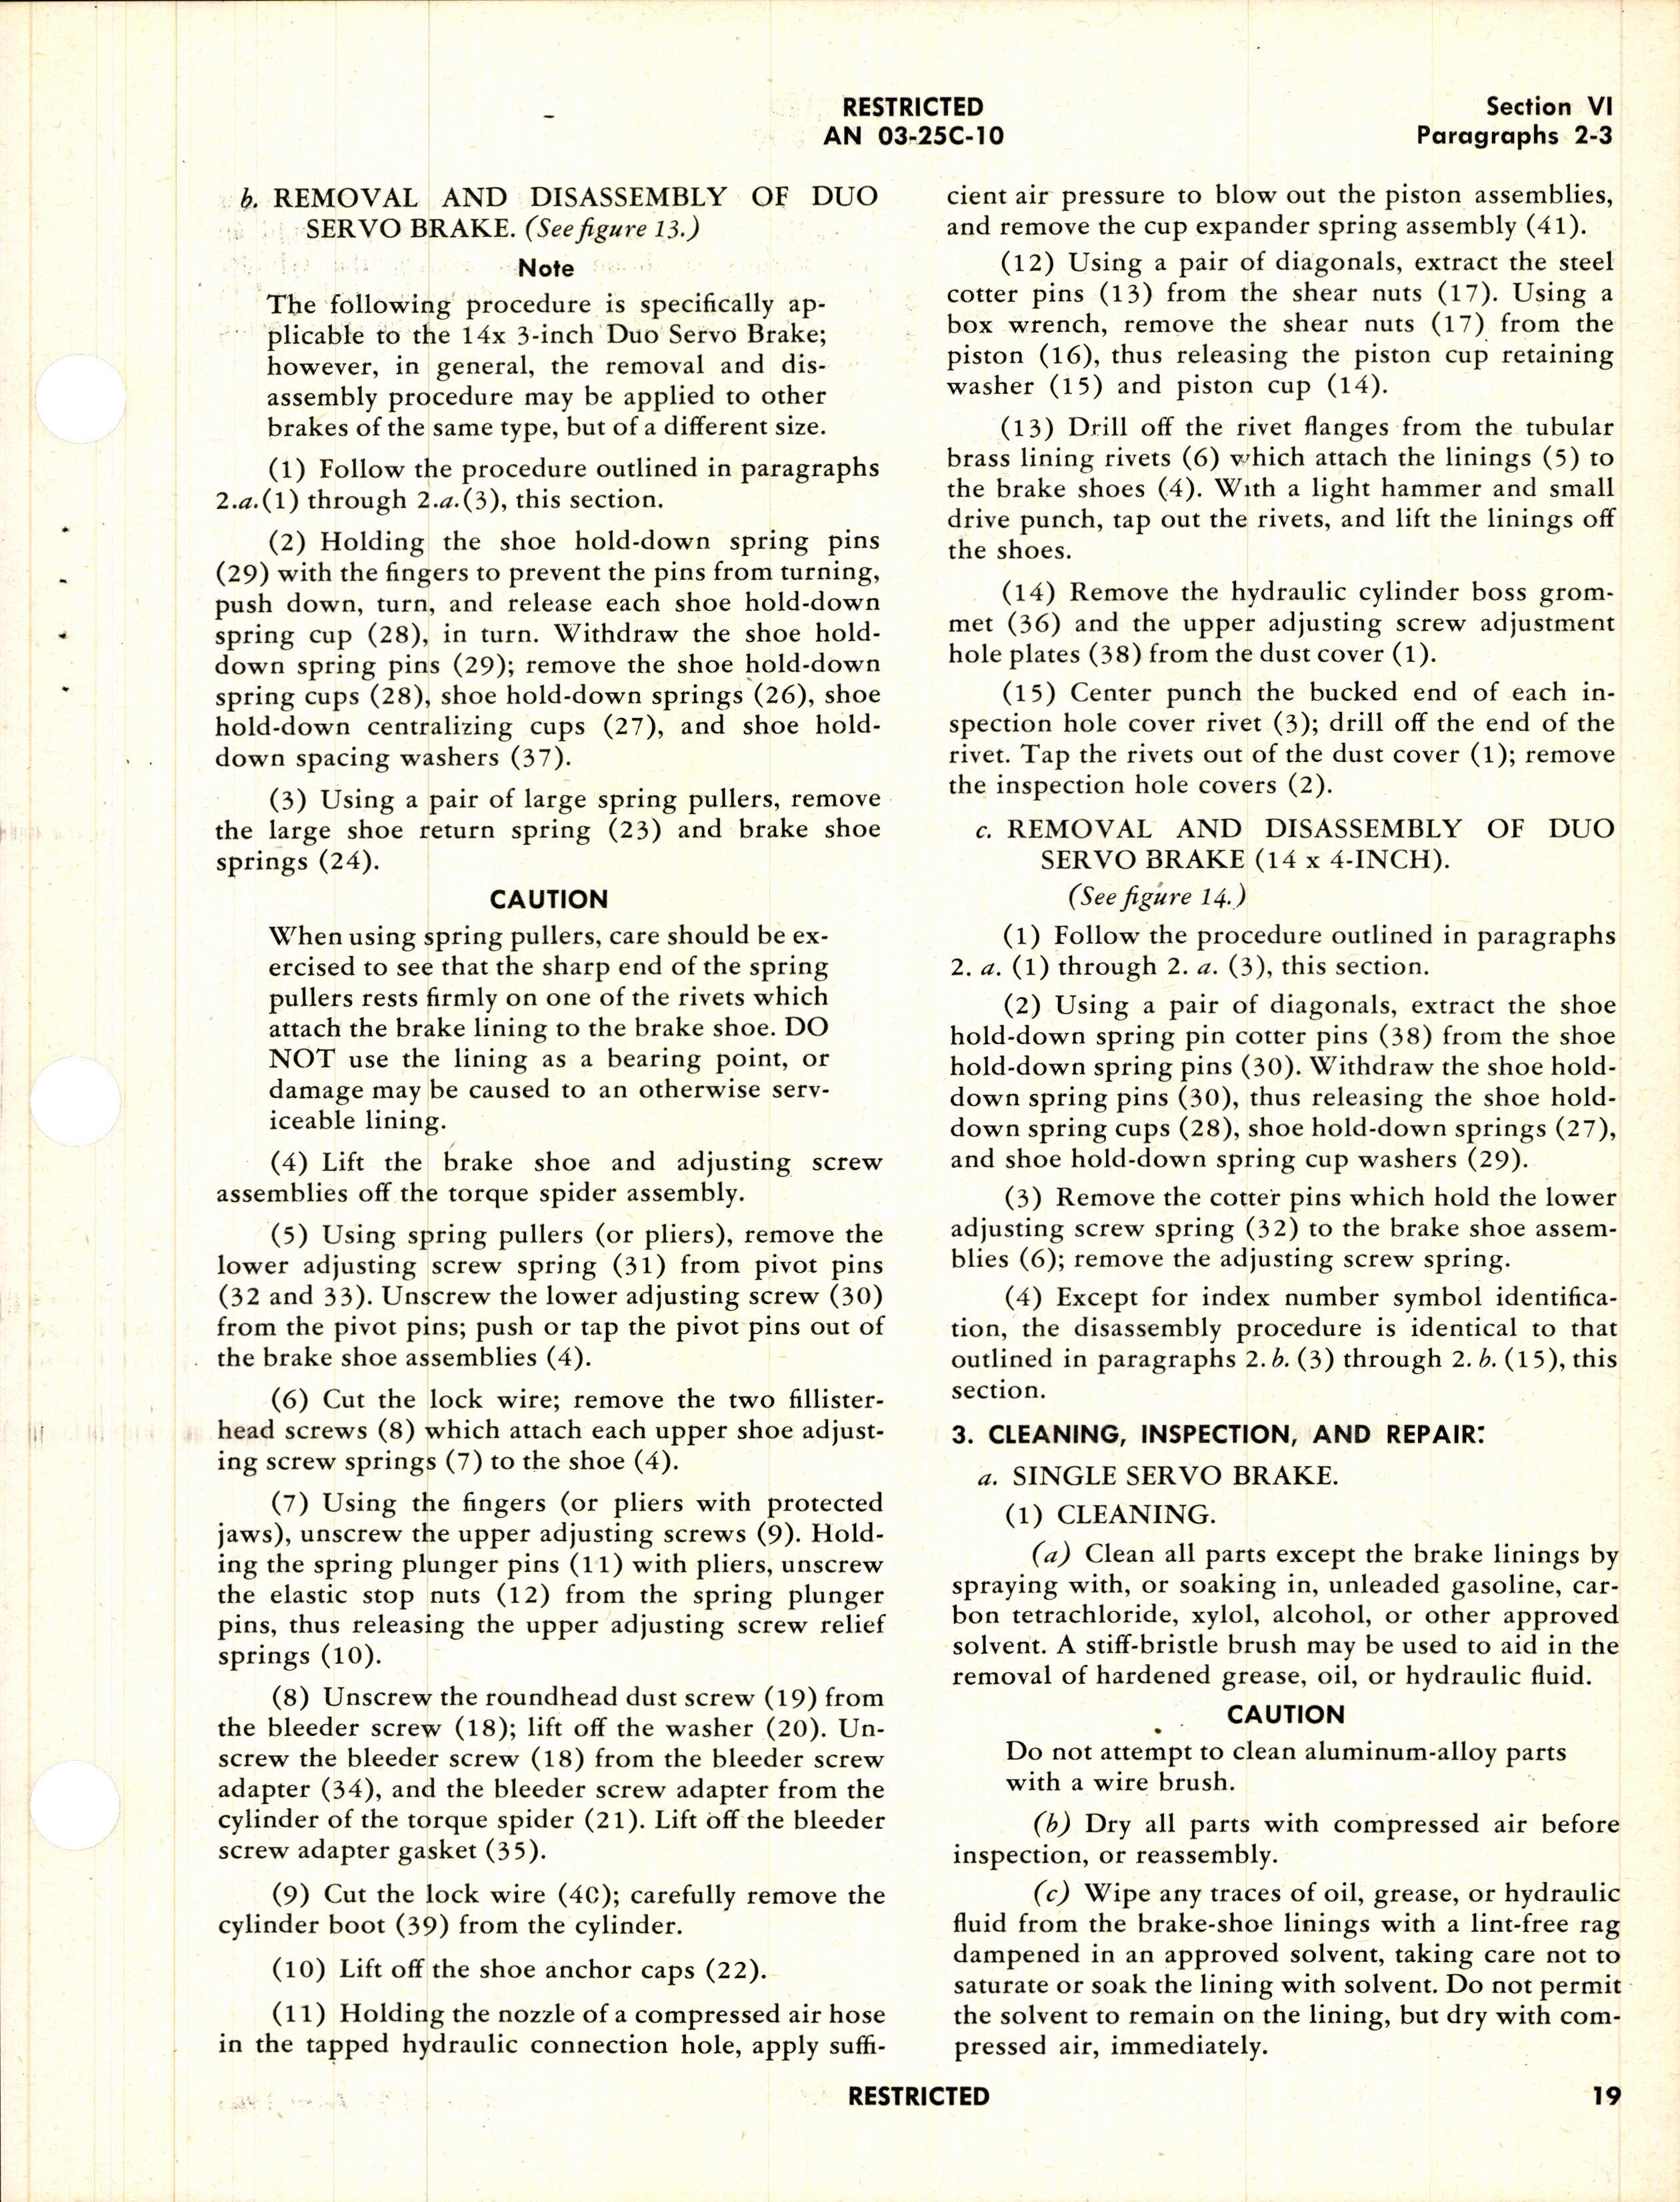 Sample page 7 from AirCorps Library document: Handbook of Instructions with Parts Catalog for Bendix Brakes - Later Types